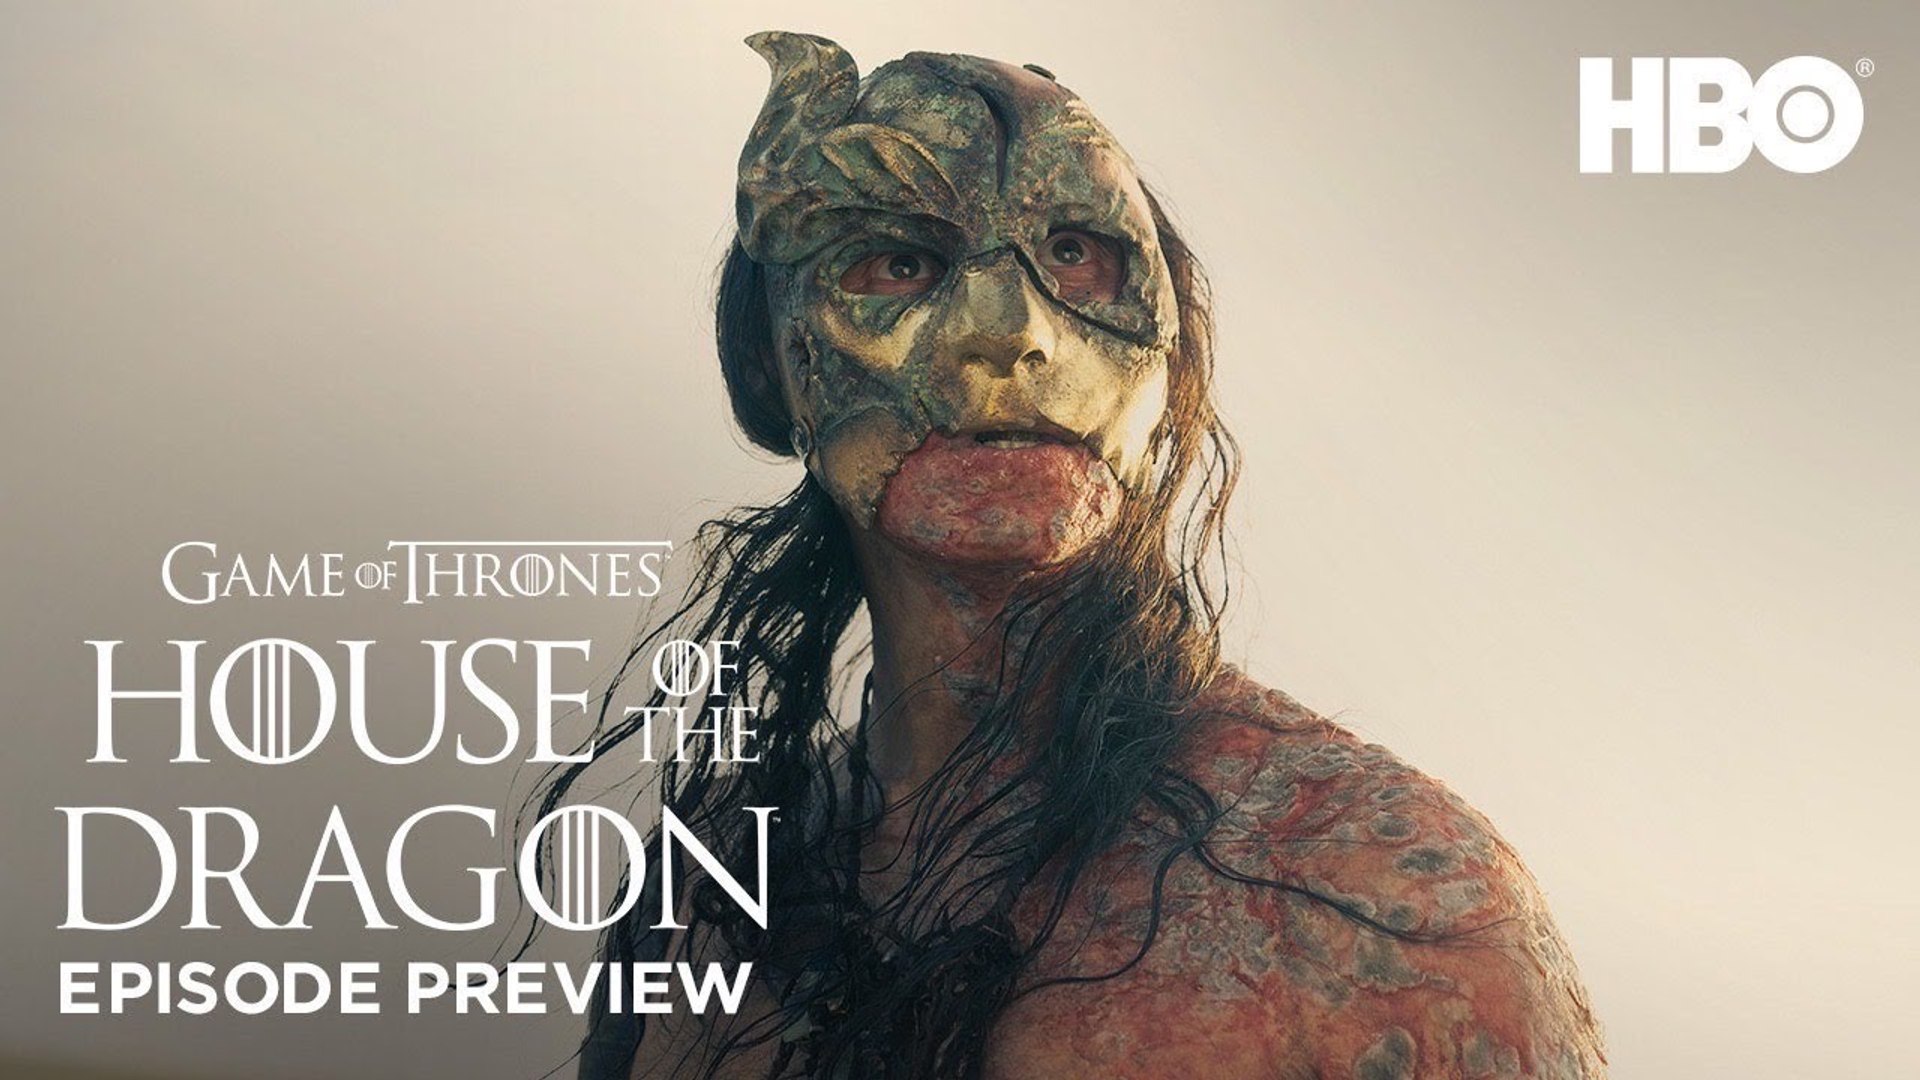 House of the Dragon Episode 1 Trailer and Game of Thrones Easter